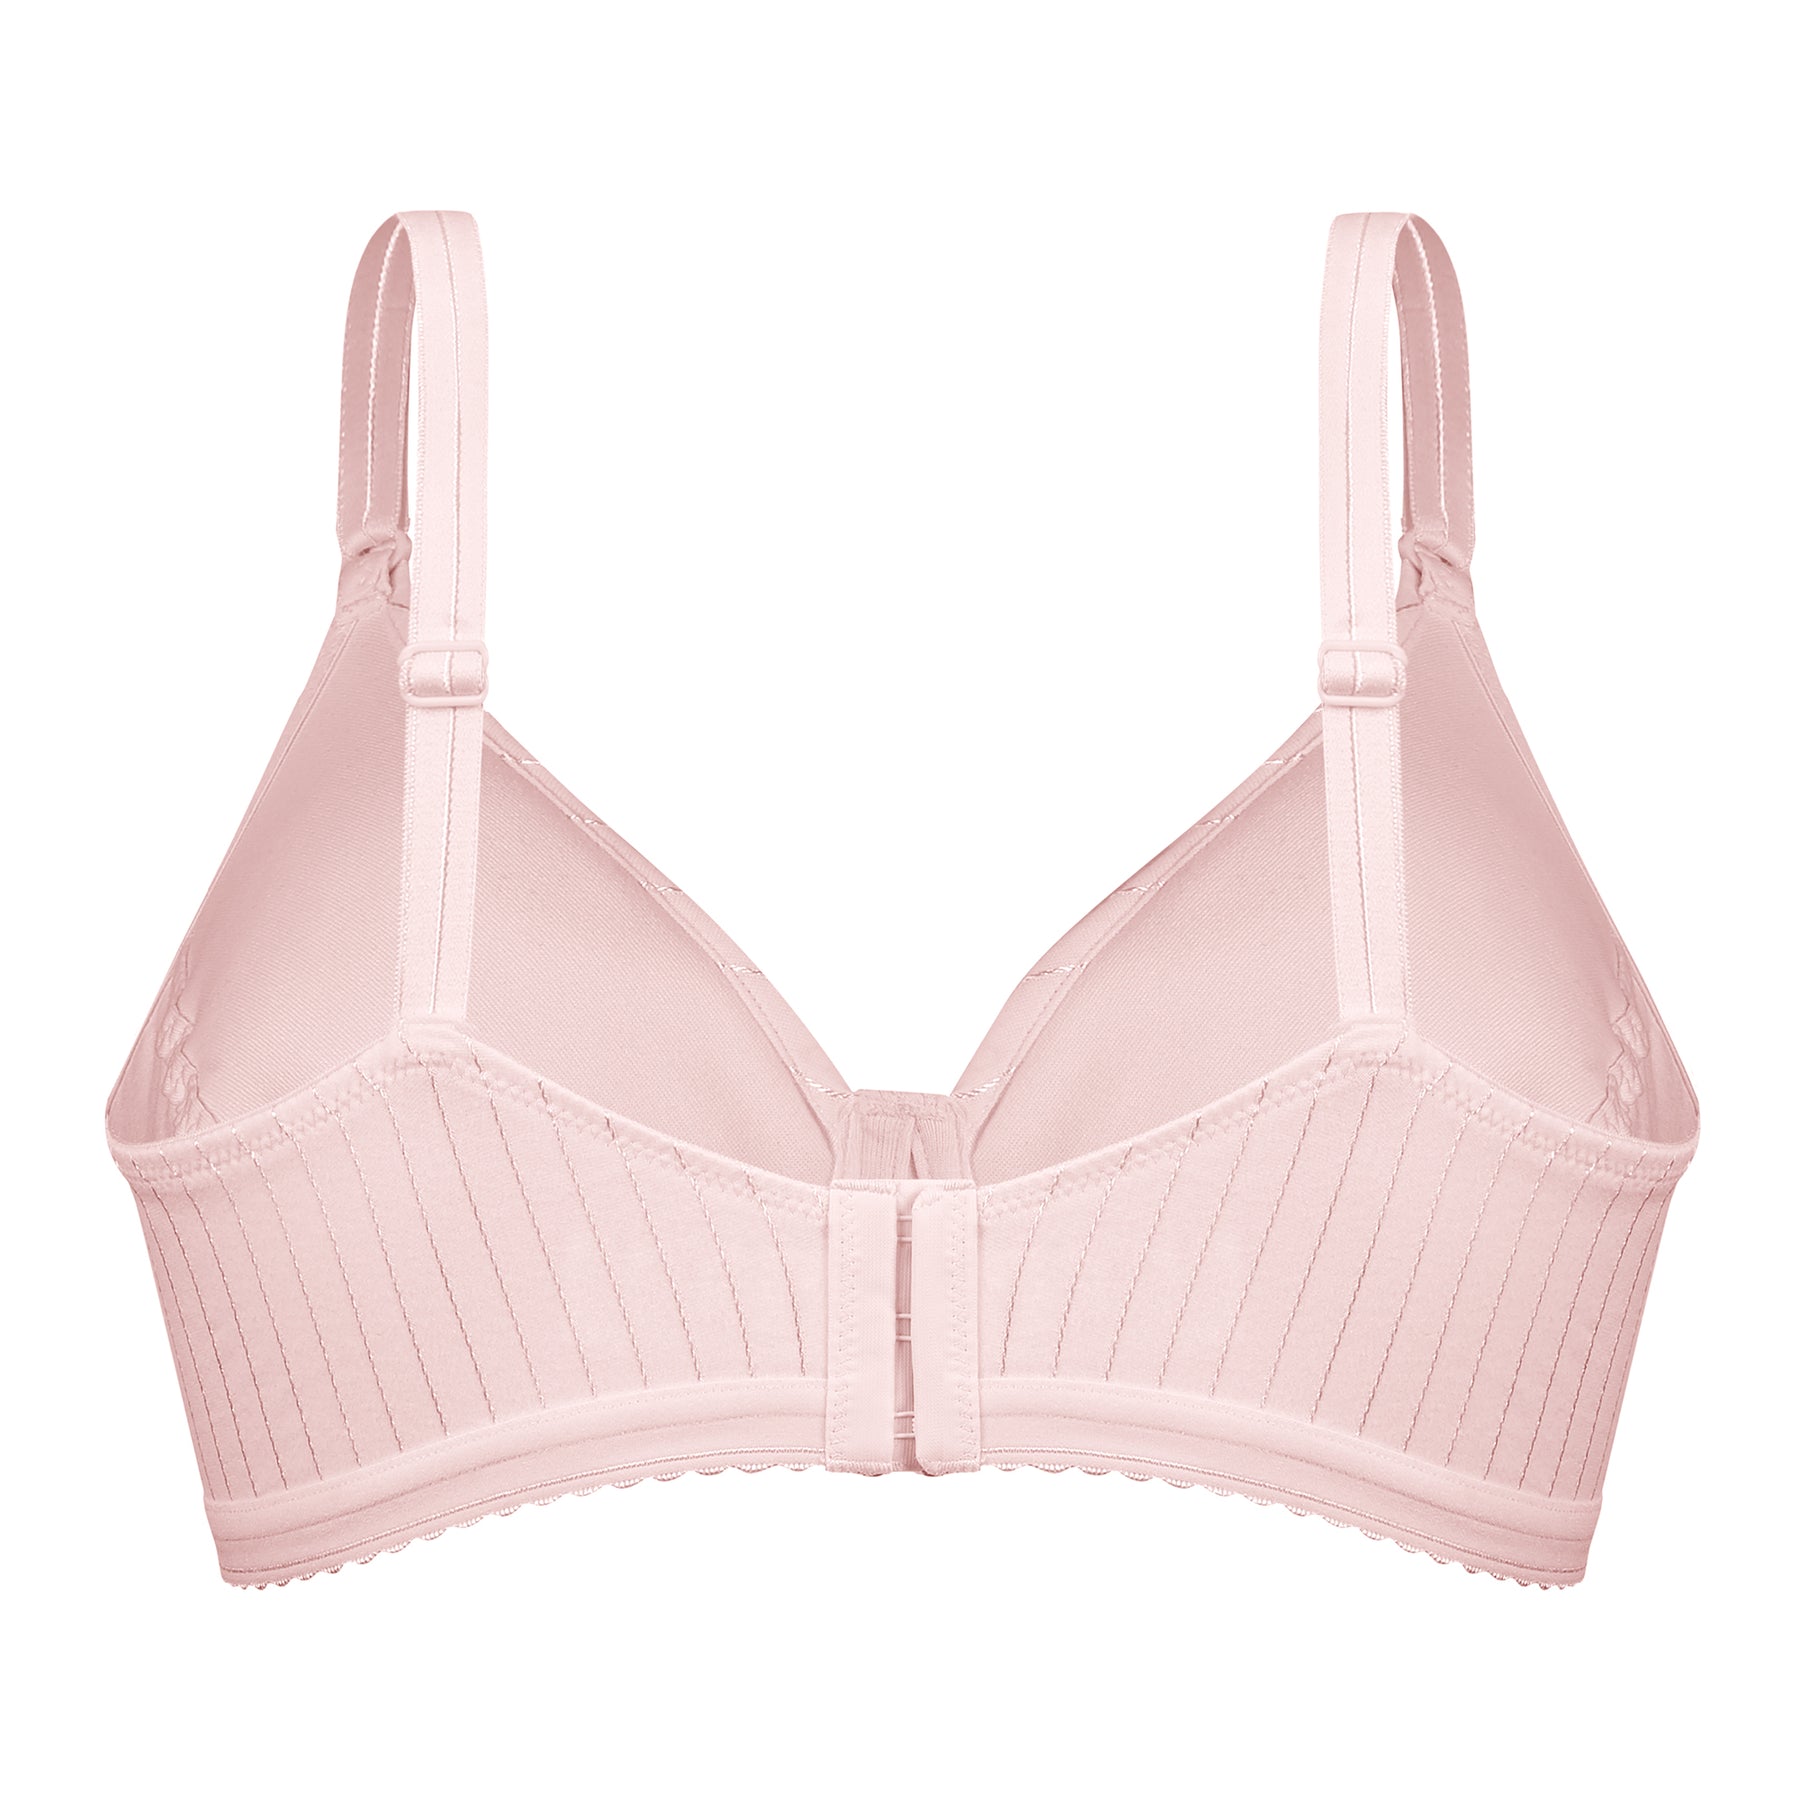 Striped Wireless Cotton Bra with Lightly-Lined Cups